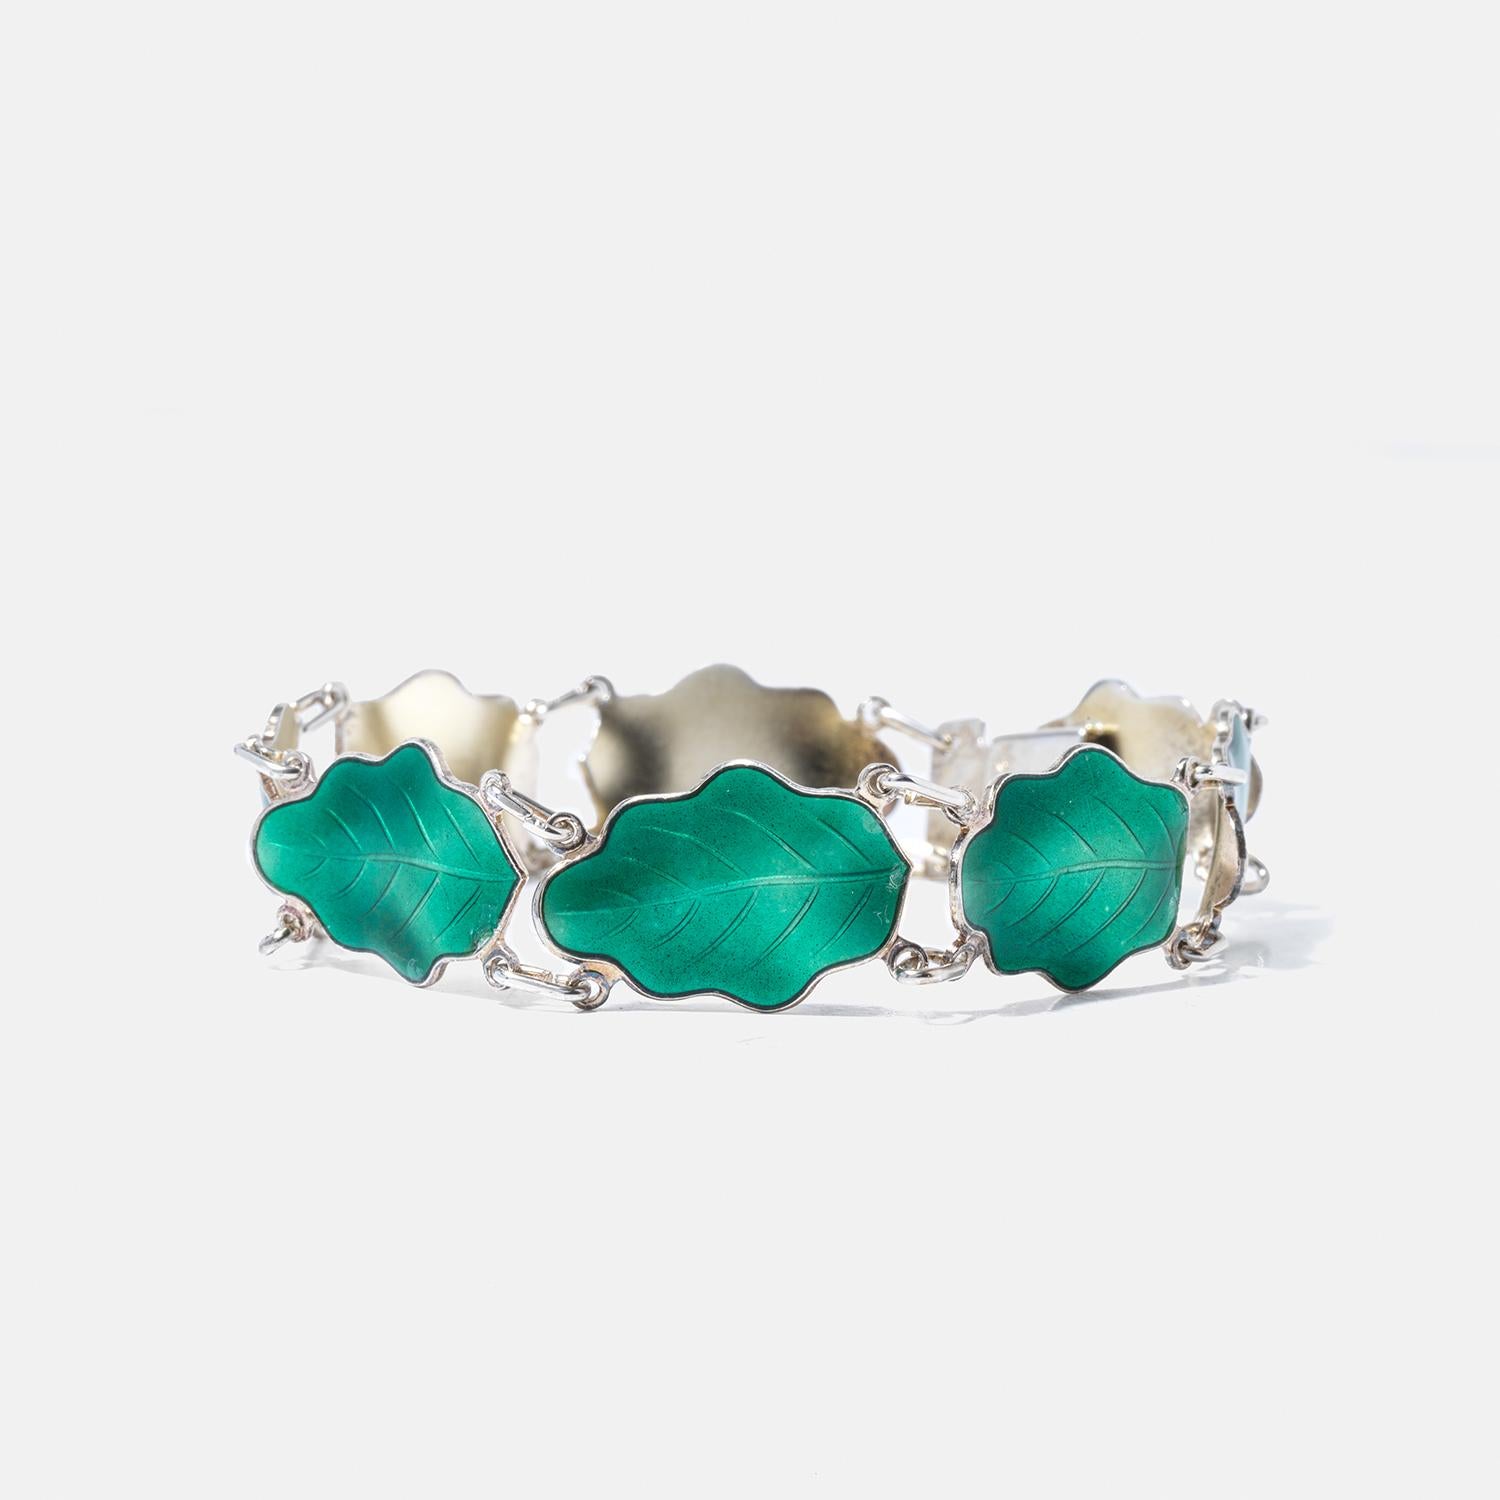 This bracelet is crafted with a series of leaf-shaped links, each featuring detailed, realistic engravings that mimic the intricate veins and contours of leaves. The leaves are made from vibrant green enamel set in polished sterling silver,